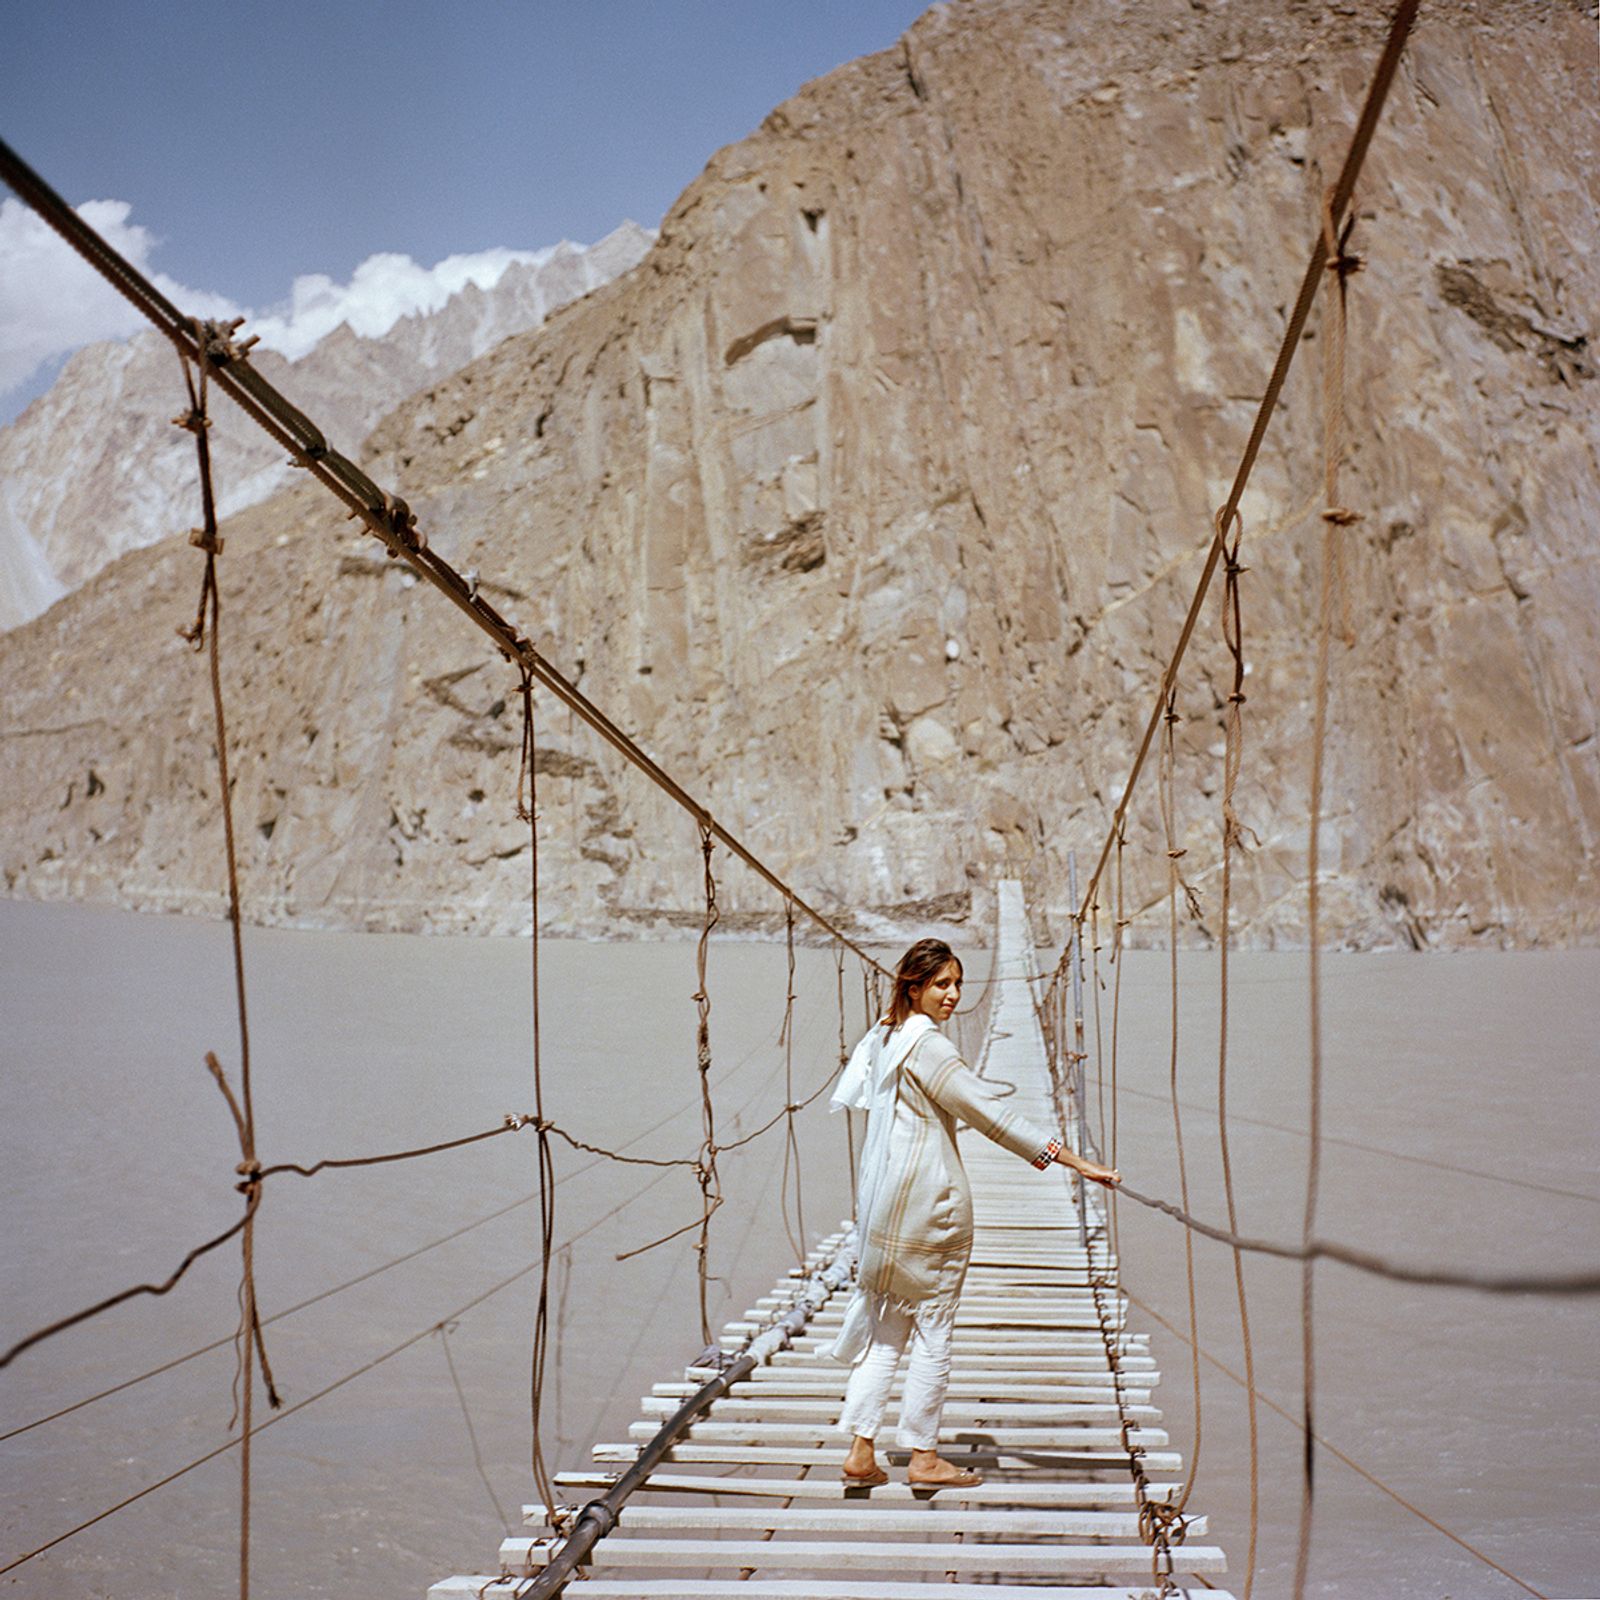 © Sara Hylton - Image from the The Rising Voices of Women in Pakistan photography project